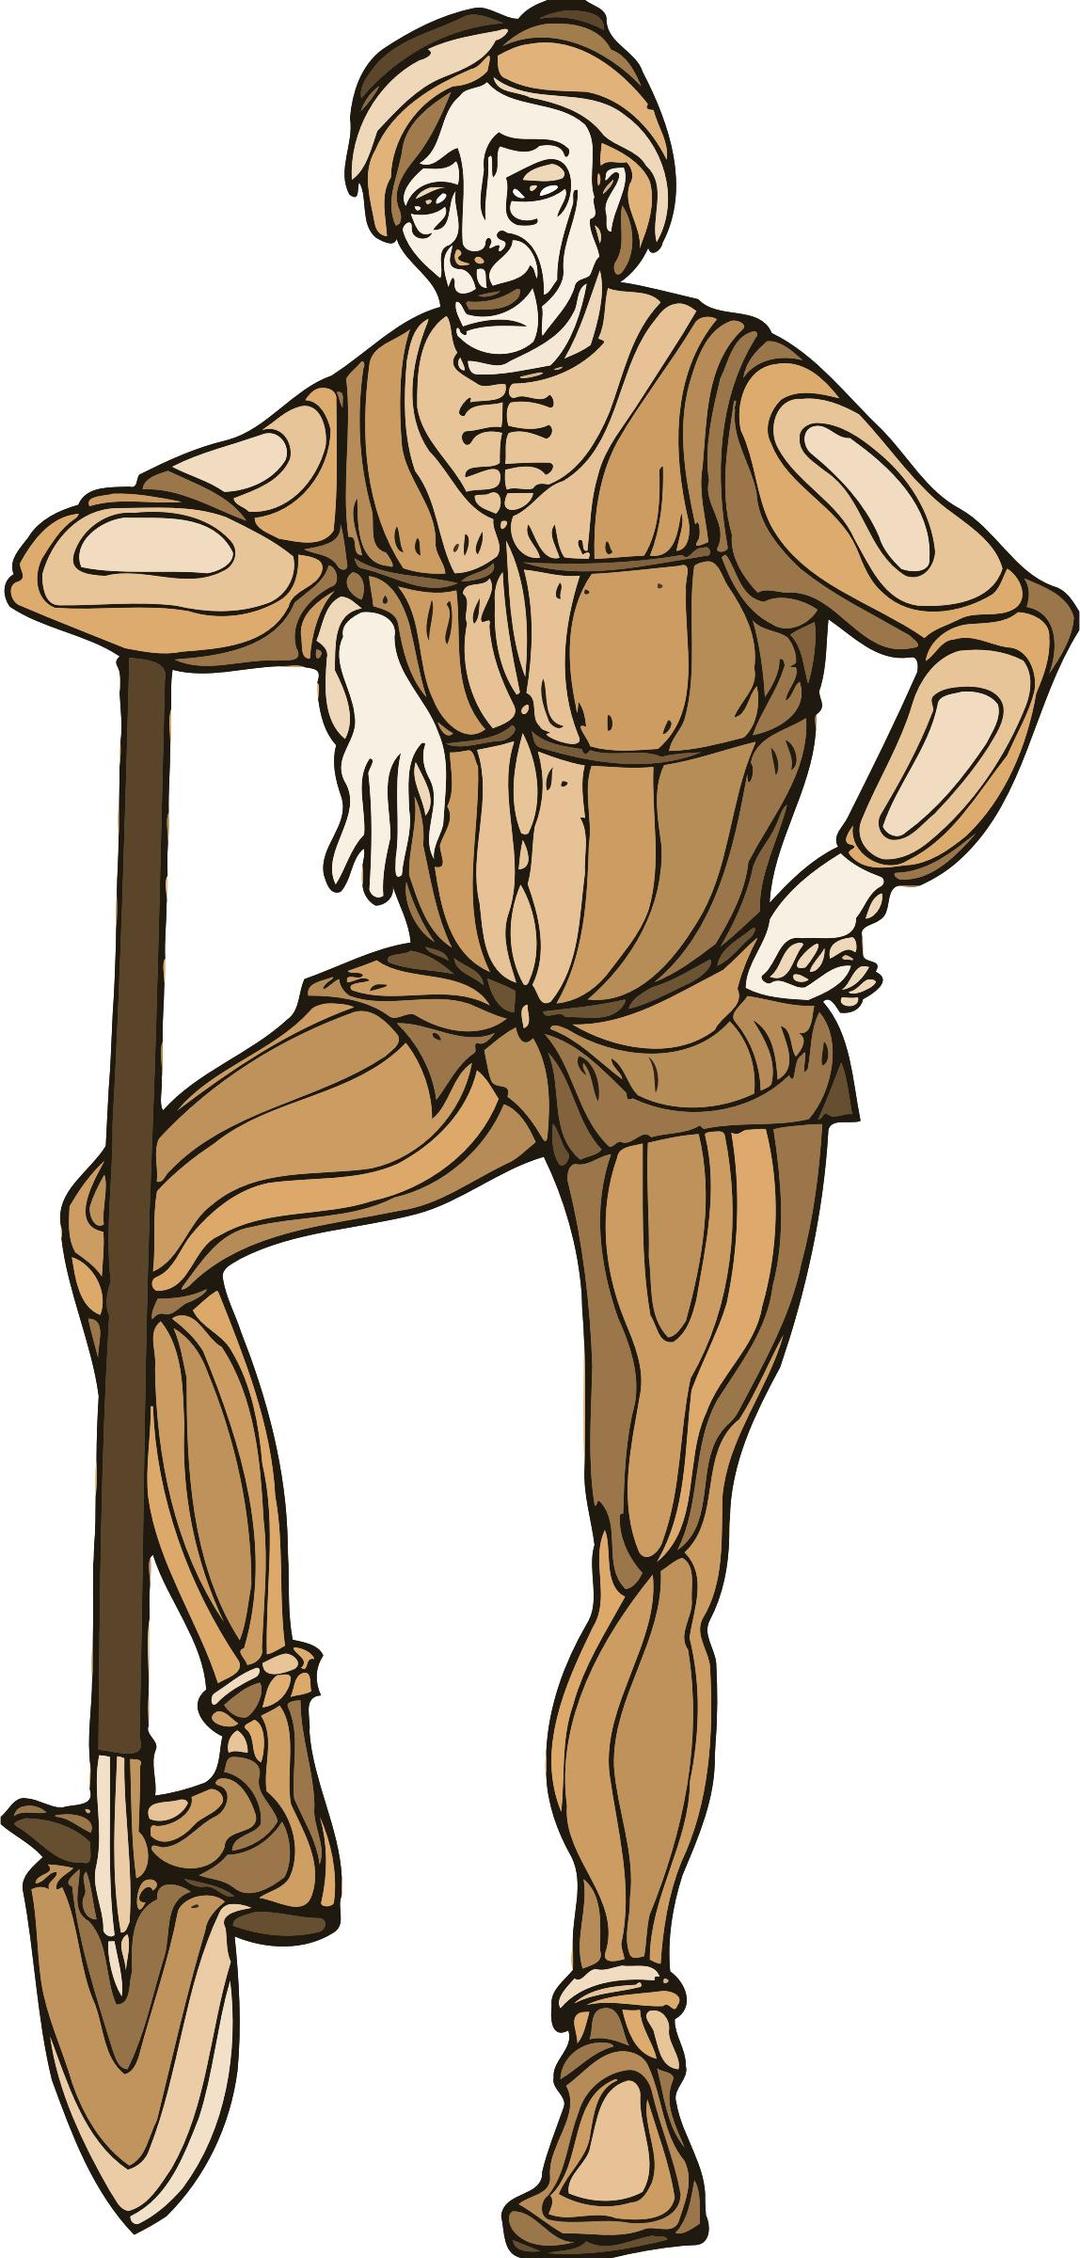 Shakespeare characters - gravedigger png transparent